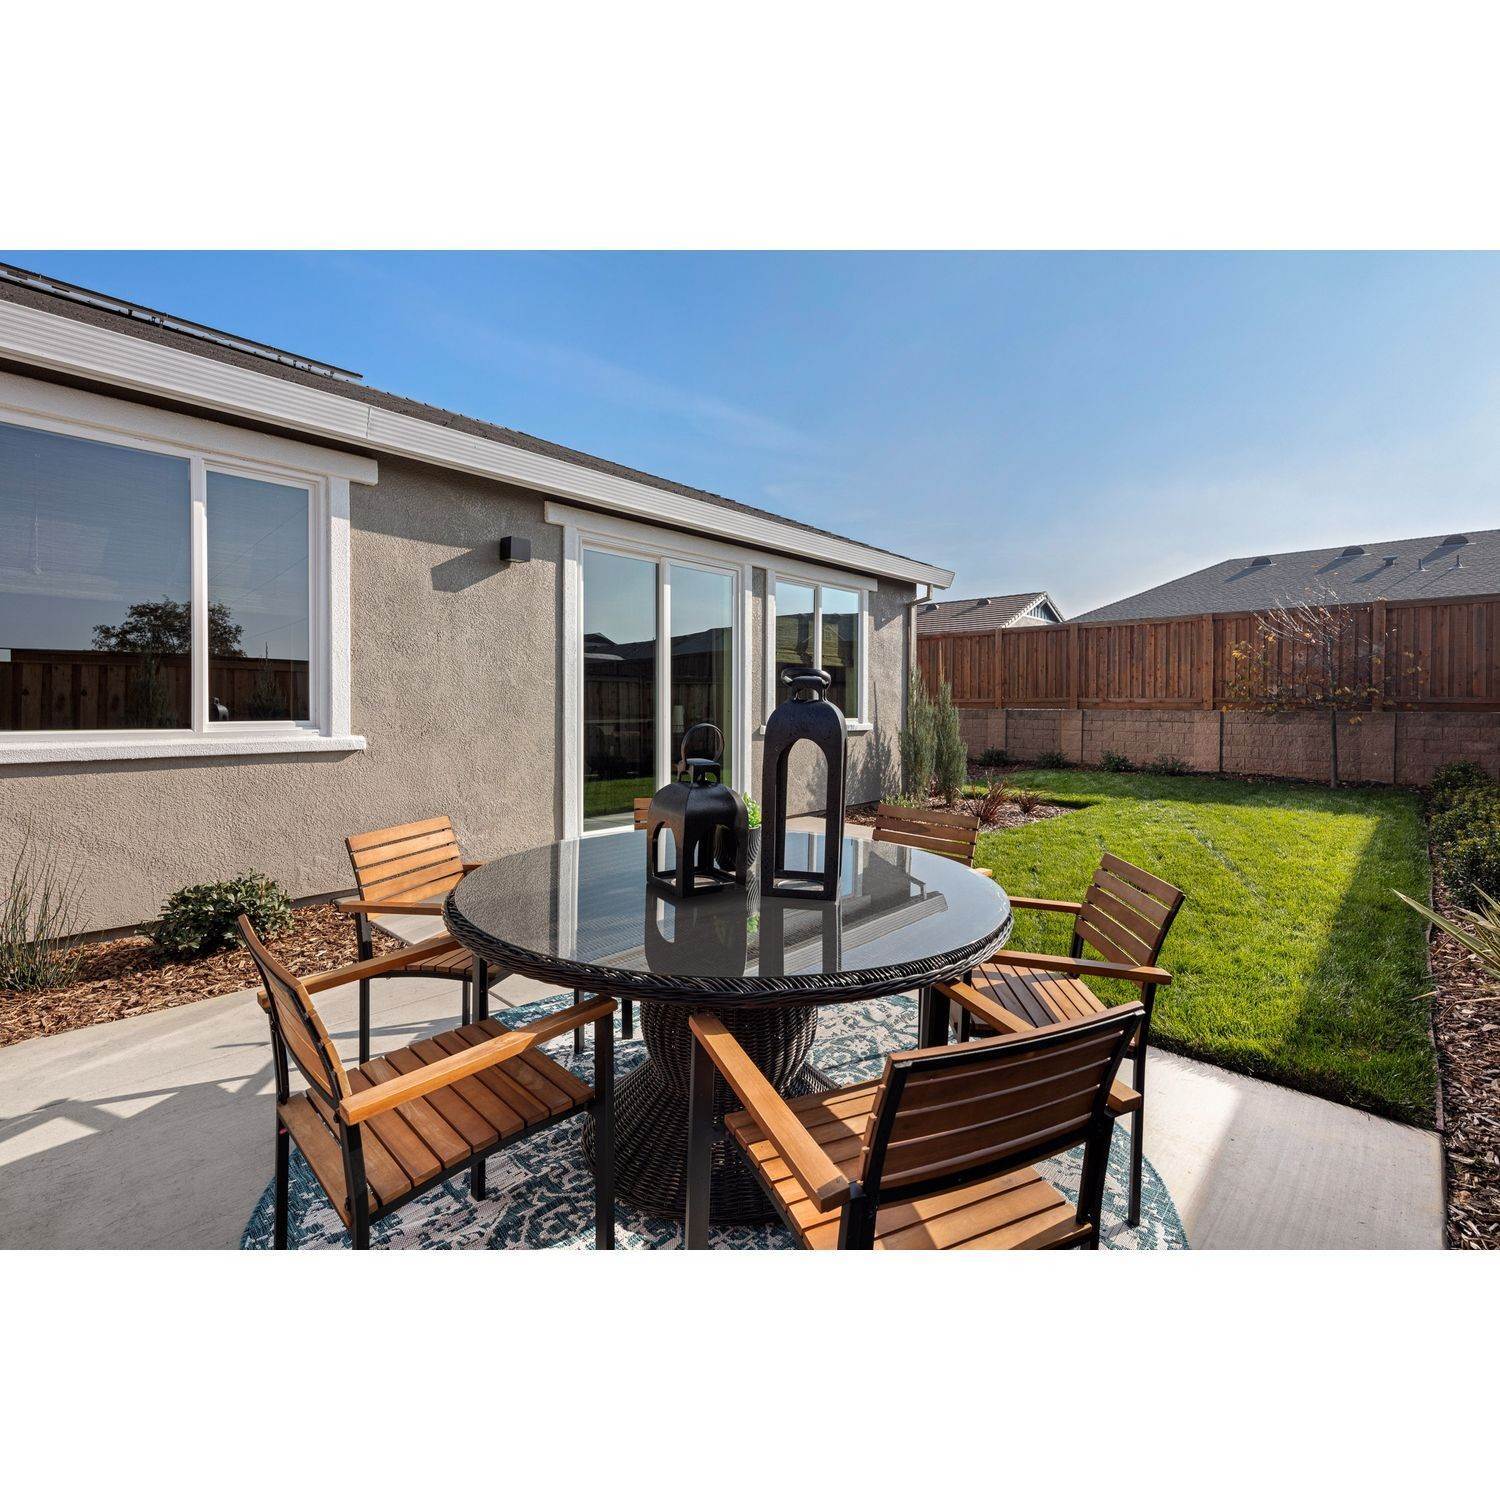 39. Cresleigh Havenwood xây dựng tại 758 Havenwood Drive, Lincoln, CA 95648